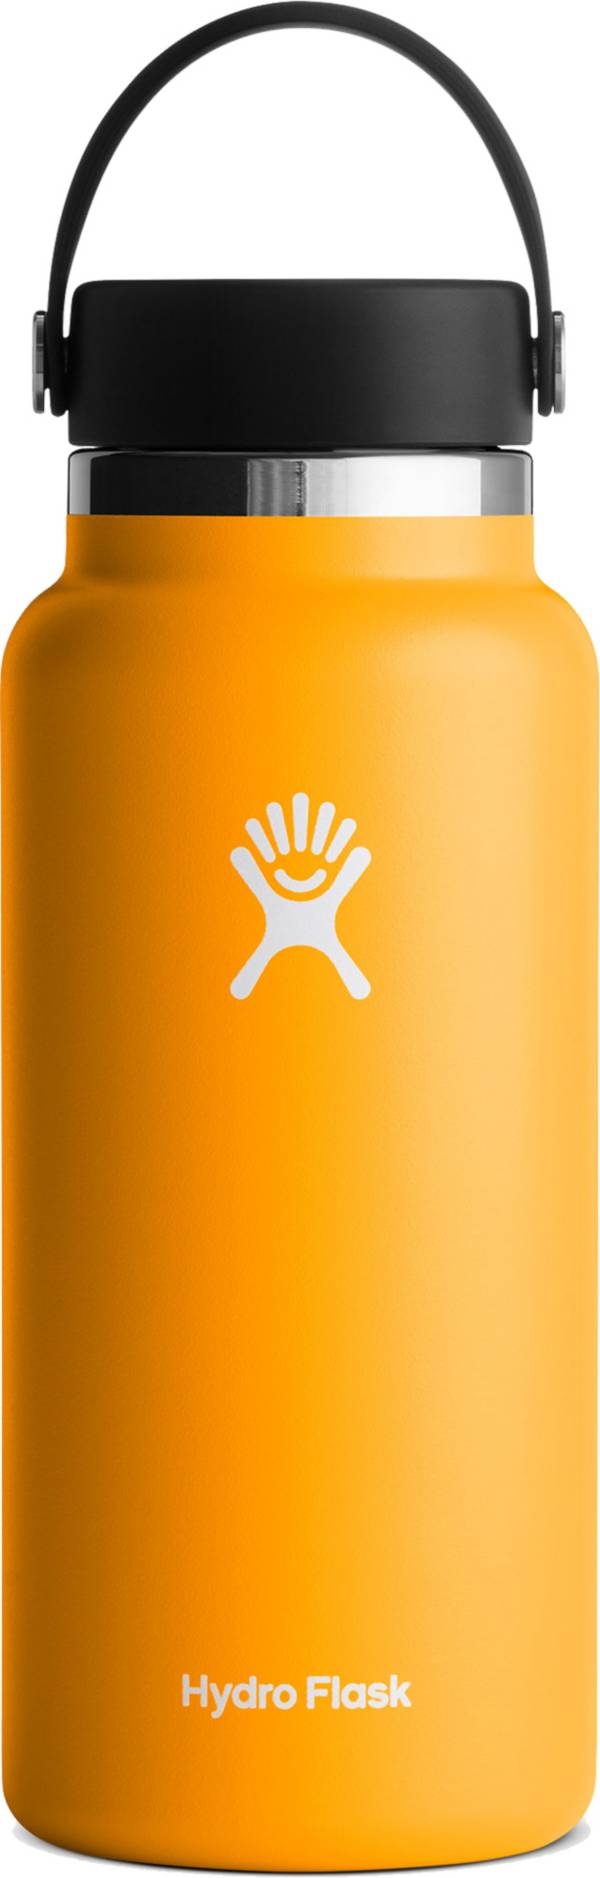 Hydro Flask Wide Mouth 32 oz. Bottle product image